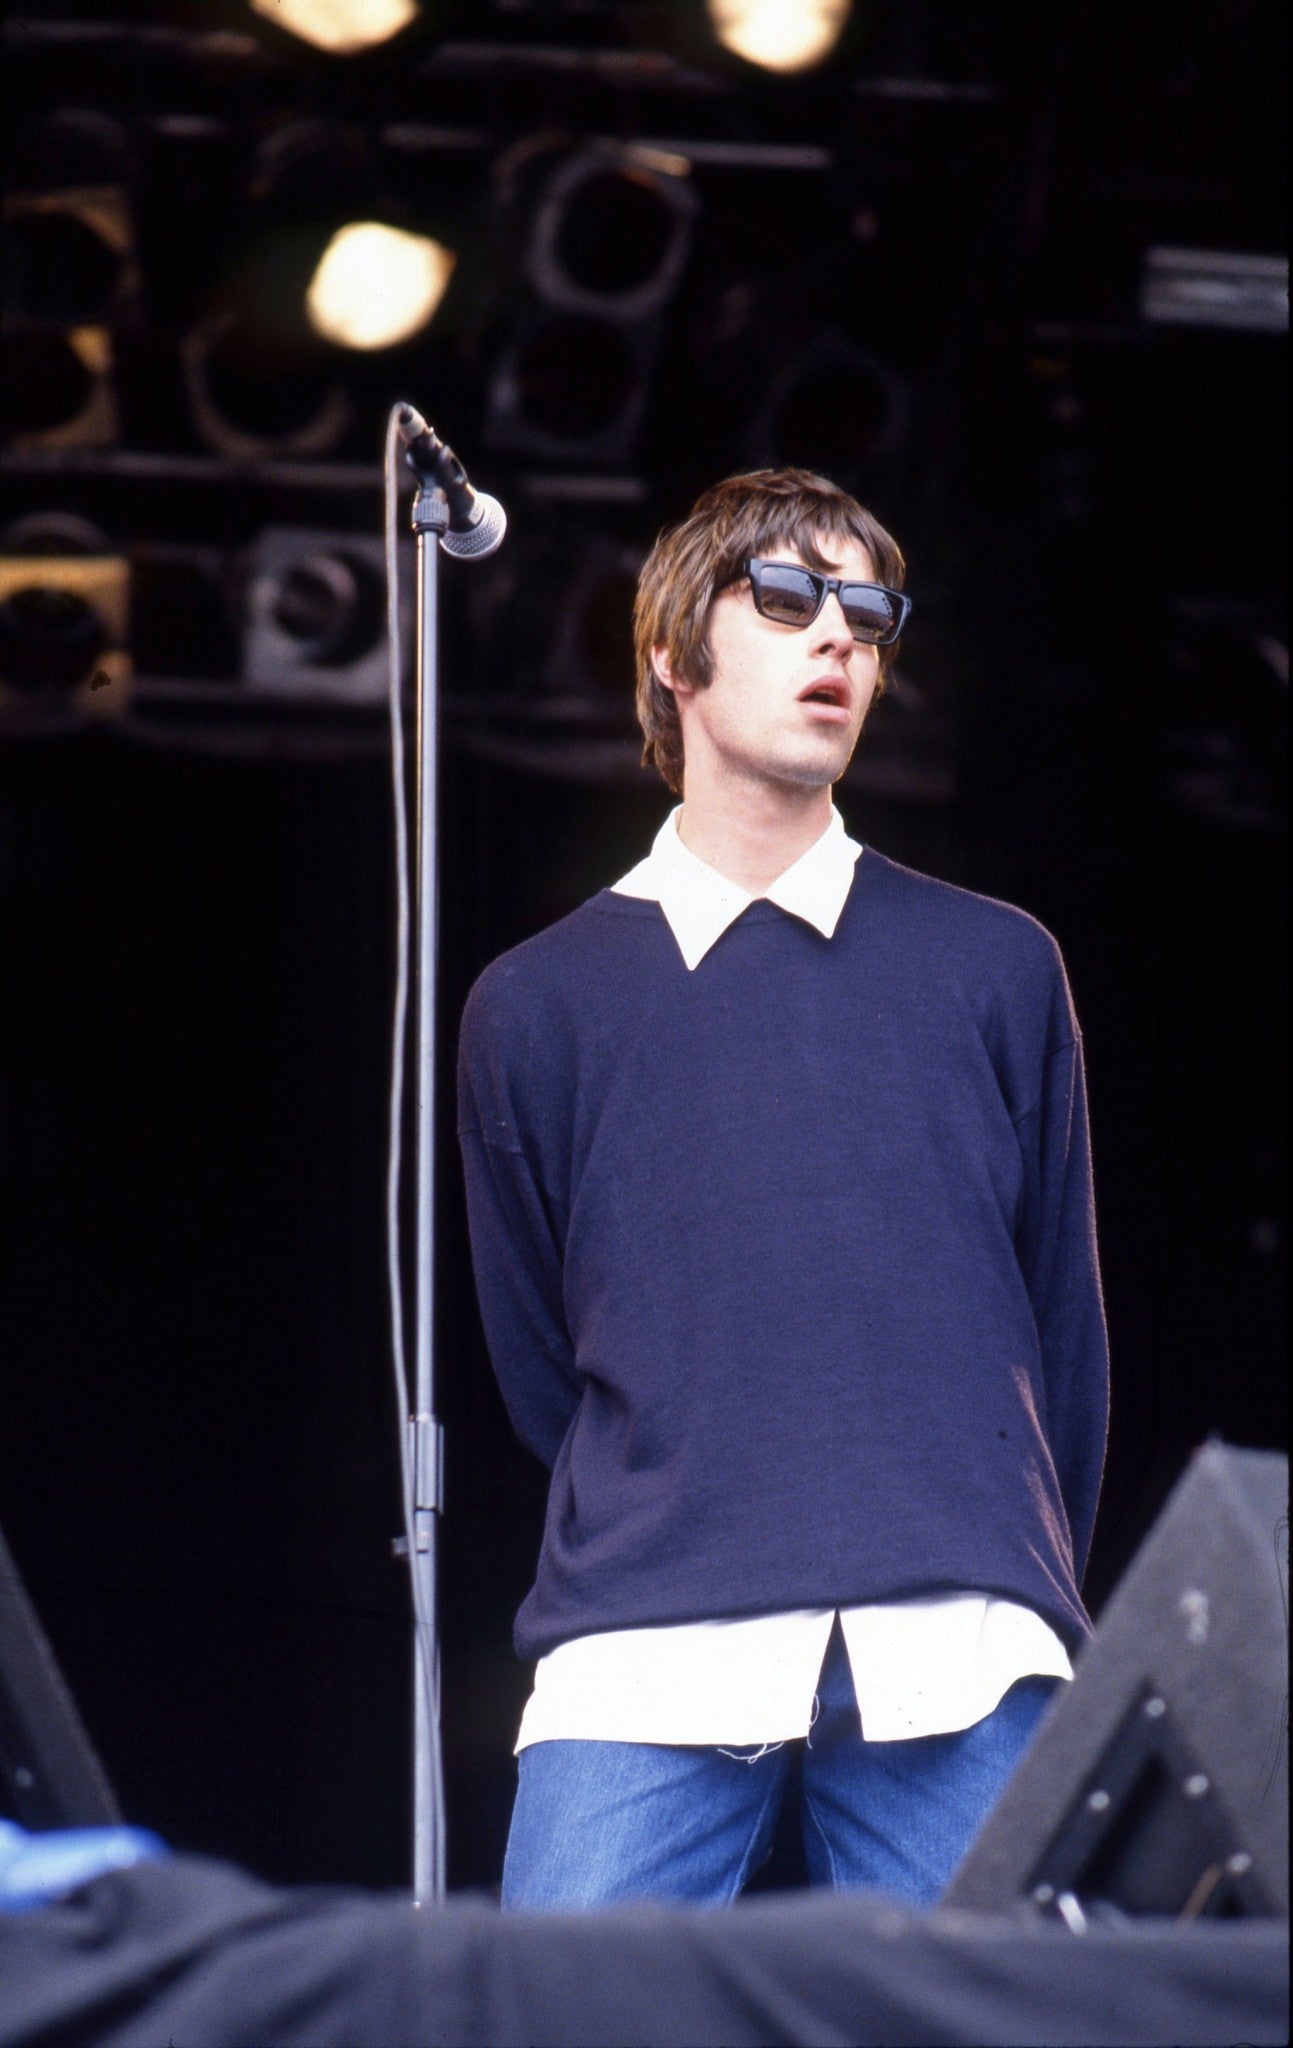 Oasis - Liam Gallagher on Stage at Glastonbury, England, 1994 Poster (2/3)